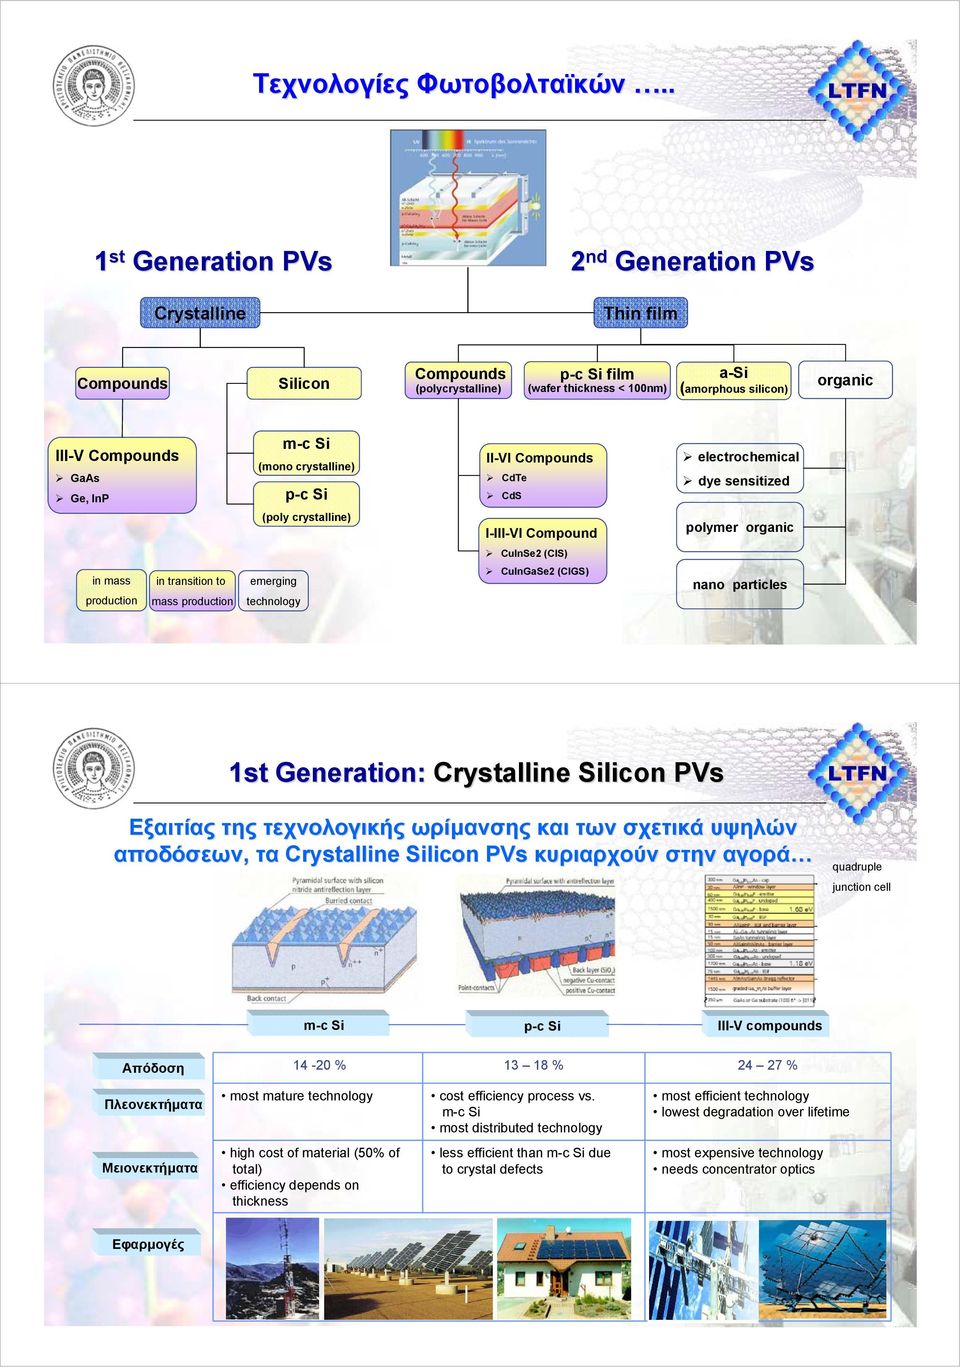 GaAs Ge, InP m-c Si (mono crystalline) p-c Si (poly crystalline) II-VI Compounds CdTe CdS I-III-VI Compound electrochemical dye sensitized polymer organic CuInSe2 (CIS) in mass production in